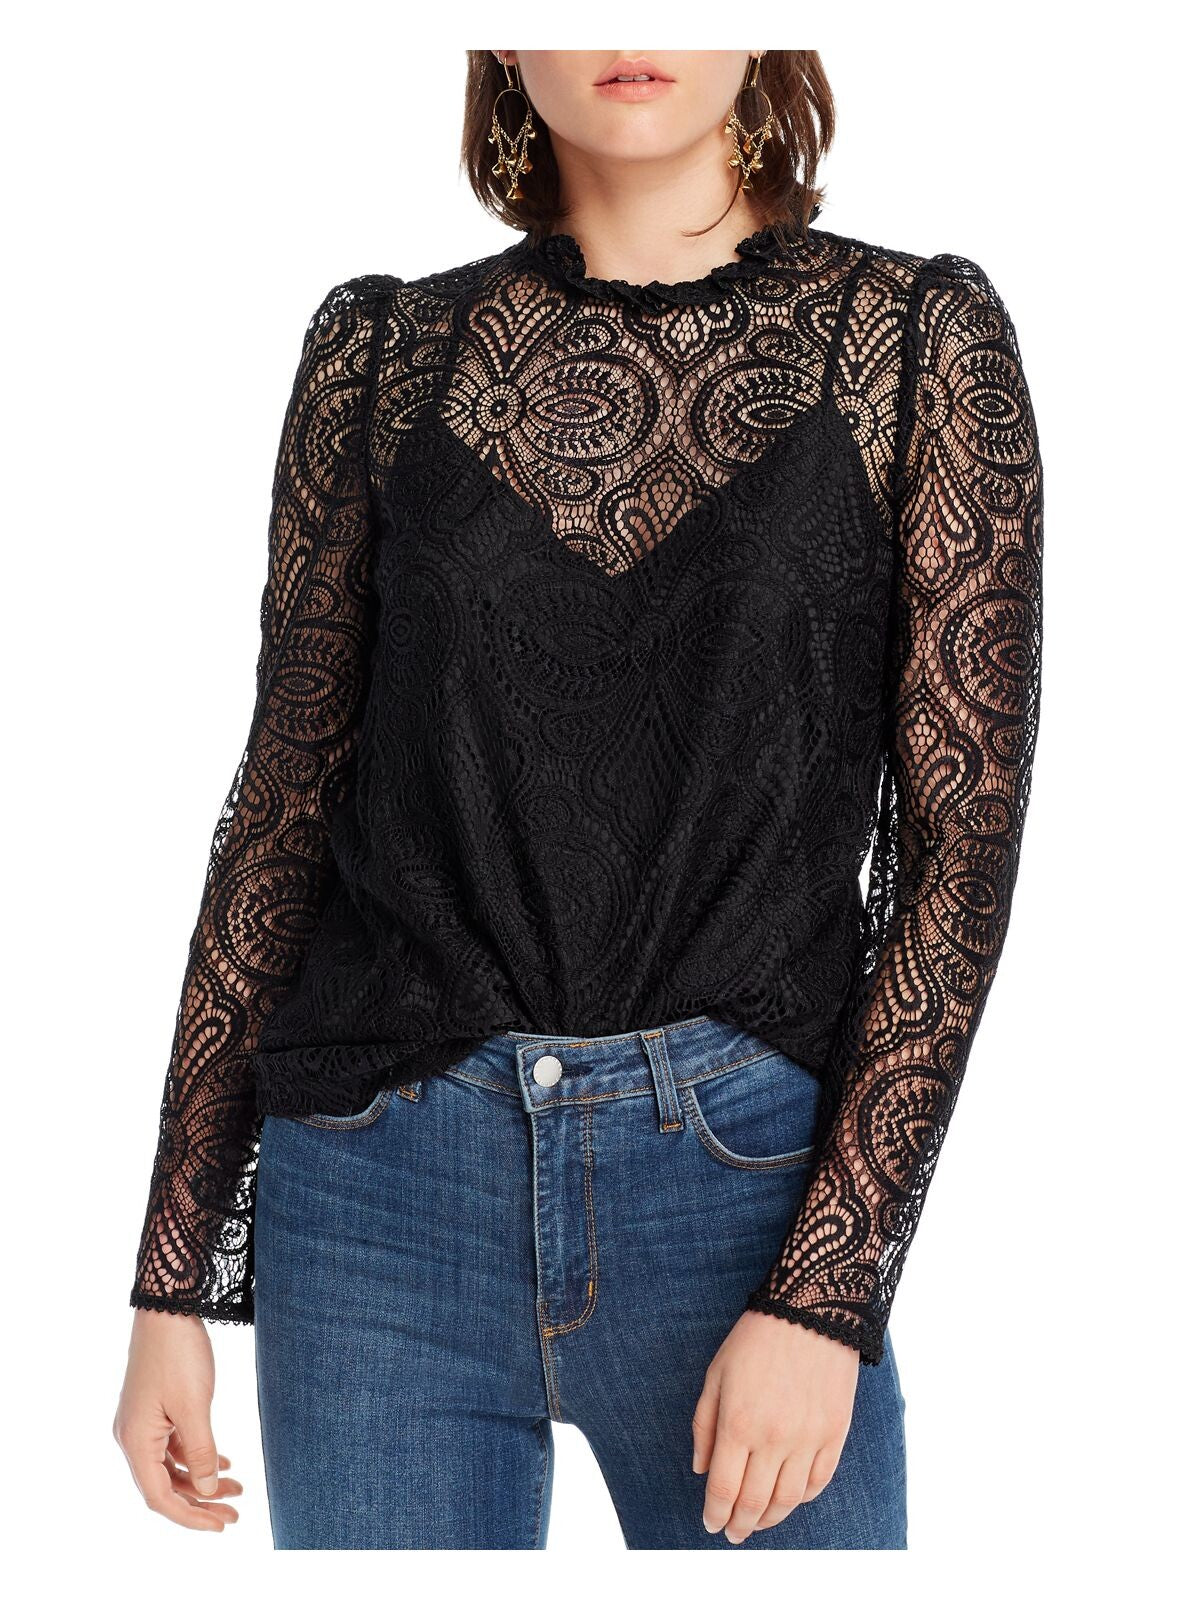 LINI Womens Black Crochet Top With Mock Neck Long Sleeve Top Size: XS